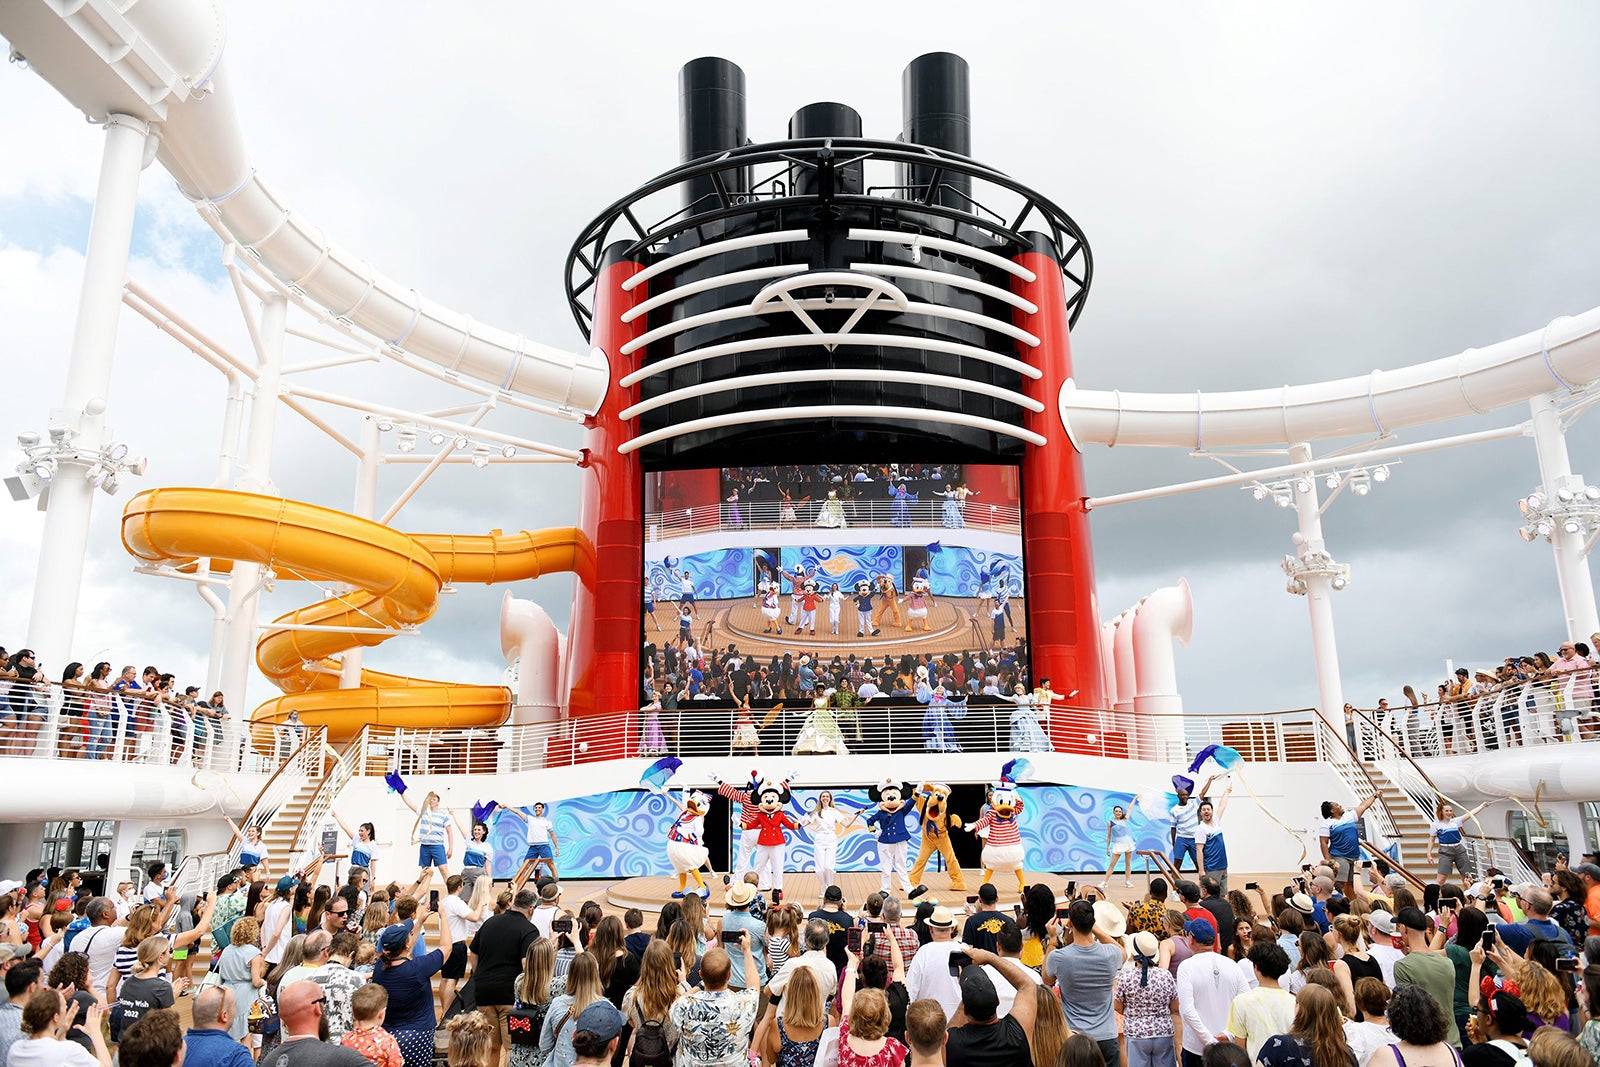 what cruise line does disney use